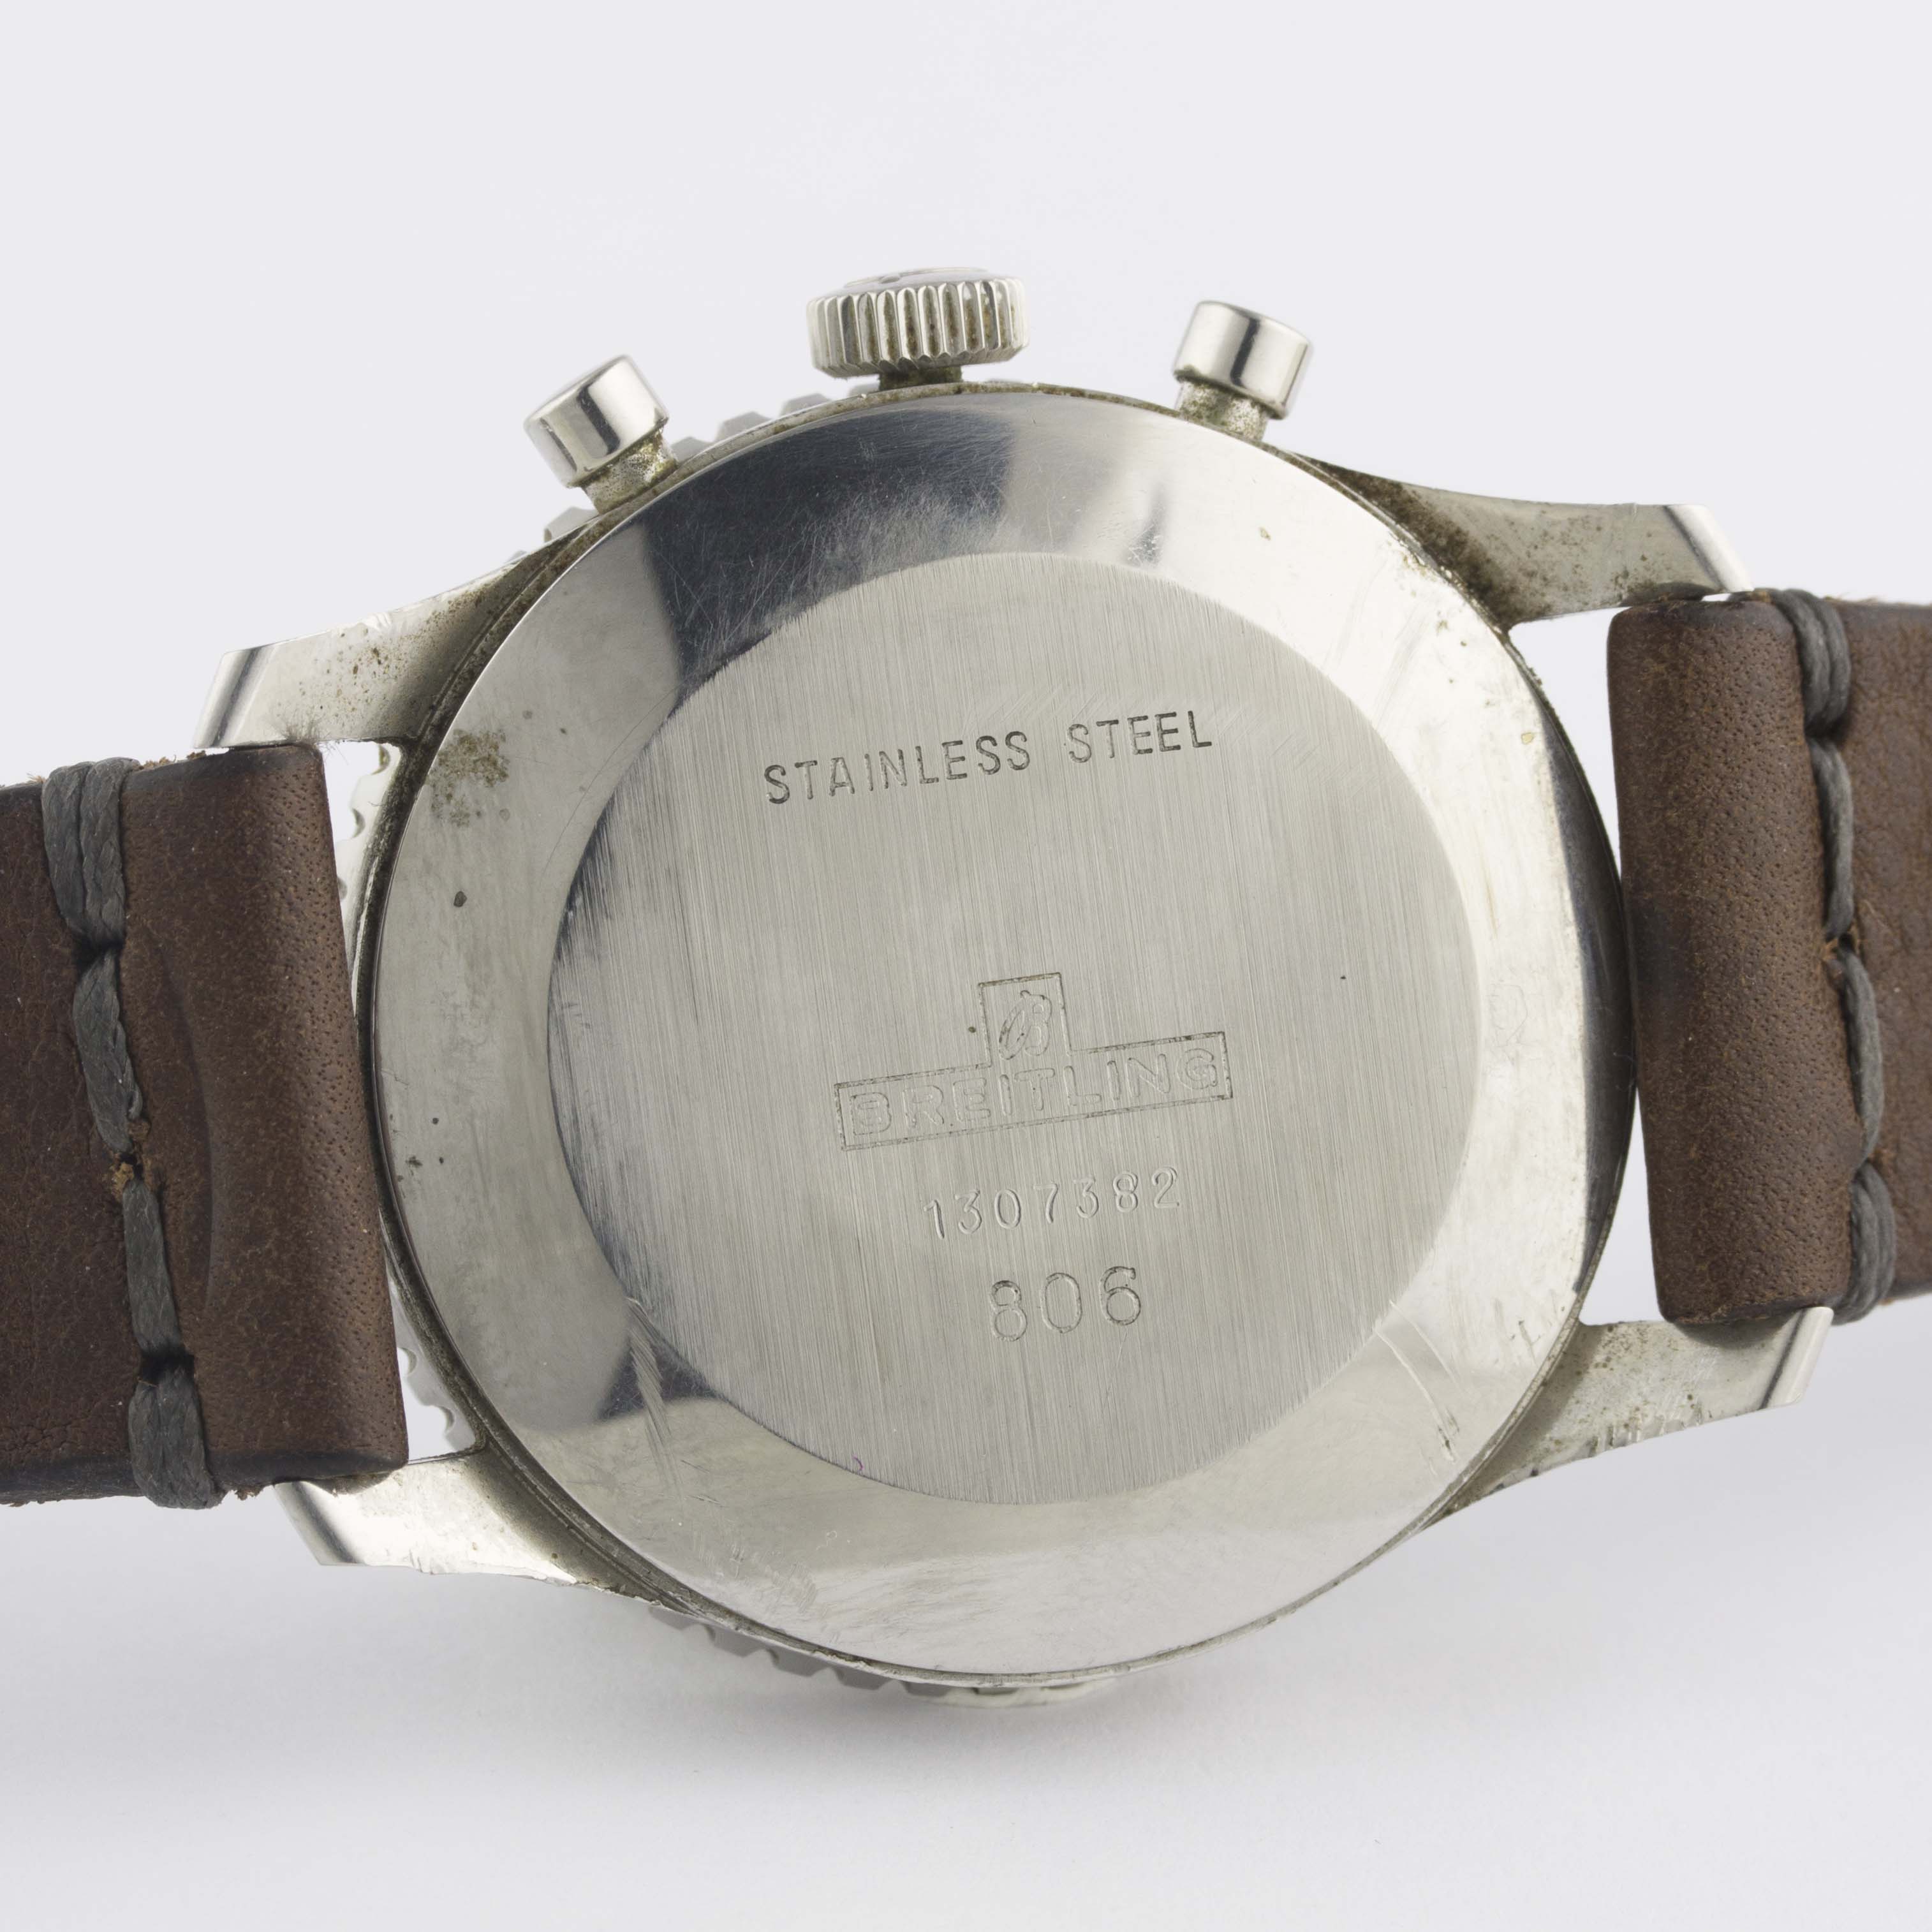 A GENTLEMAN'S STAINLESS STEEL BREITLING NAVITIMER CHRONOGRAPH WRIST WATCH CIRCA 1969, REF. 806 - Image 7 of 11